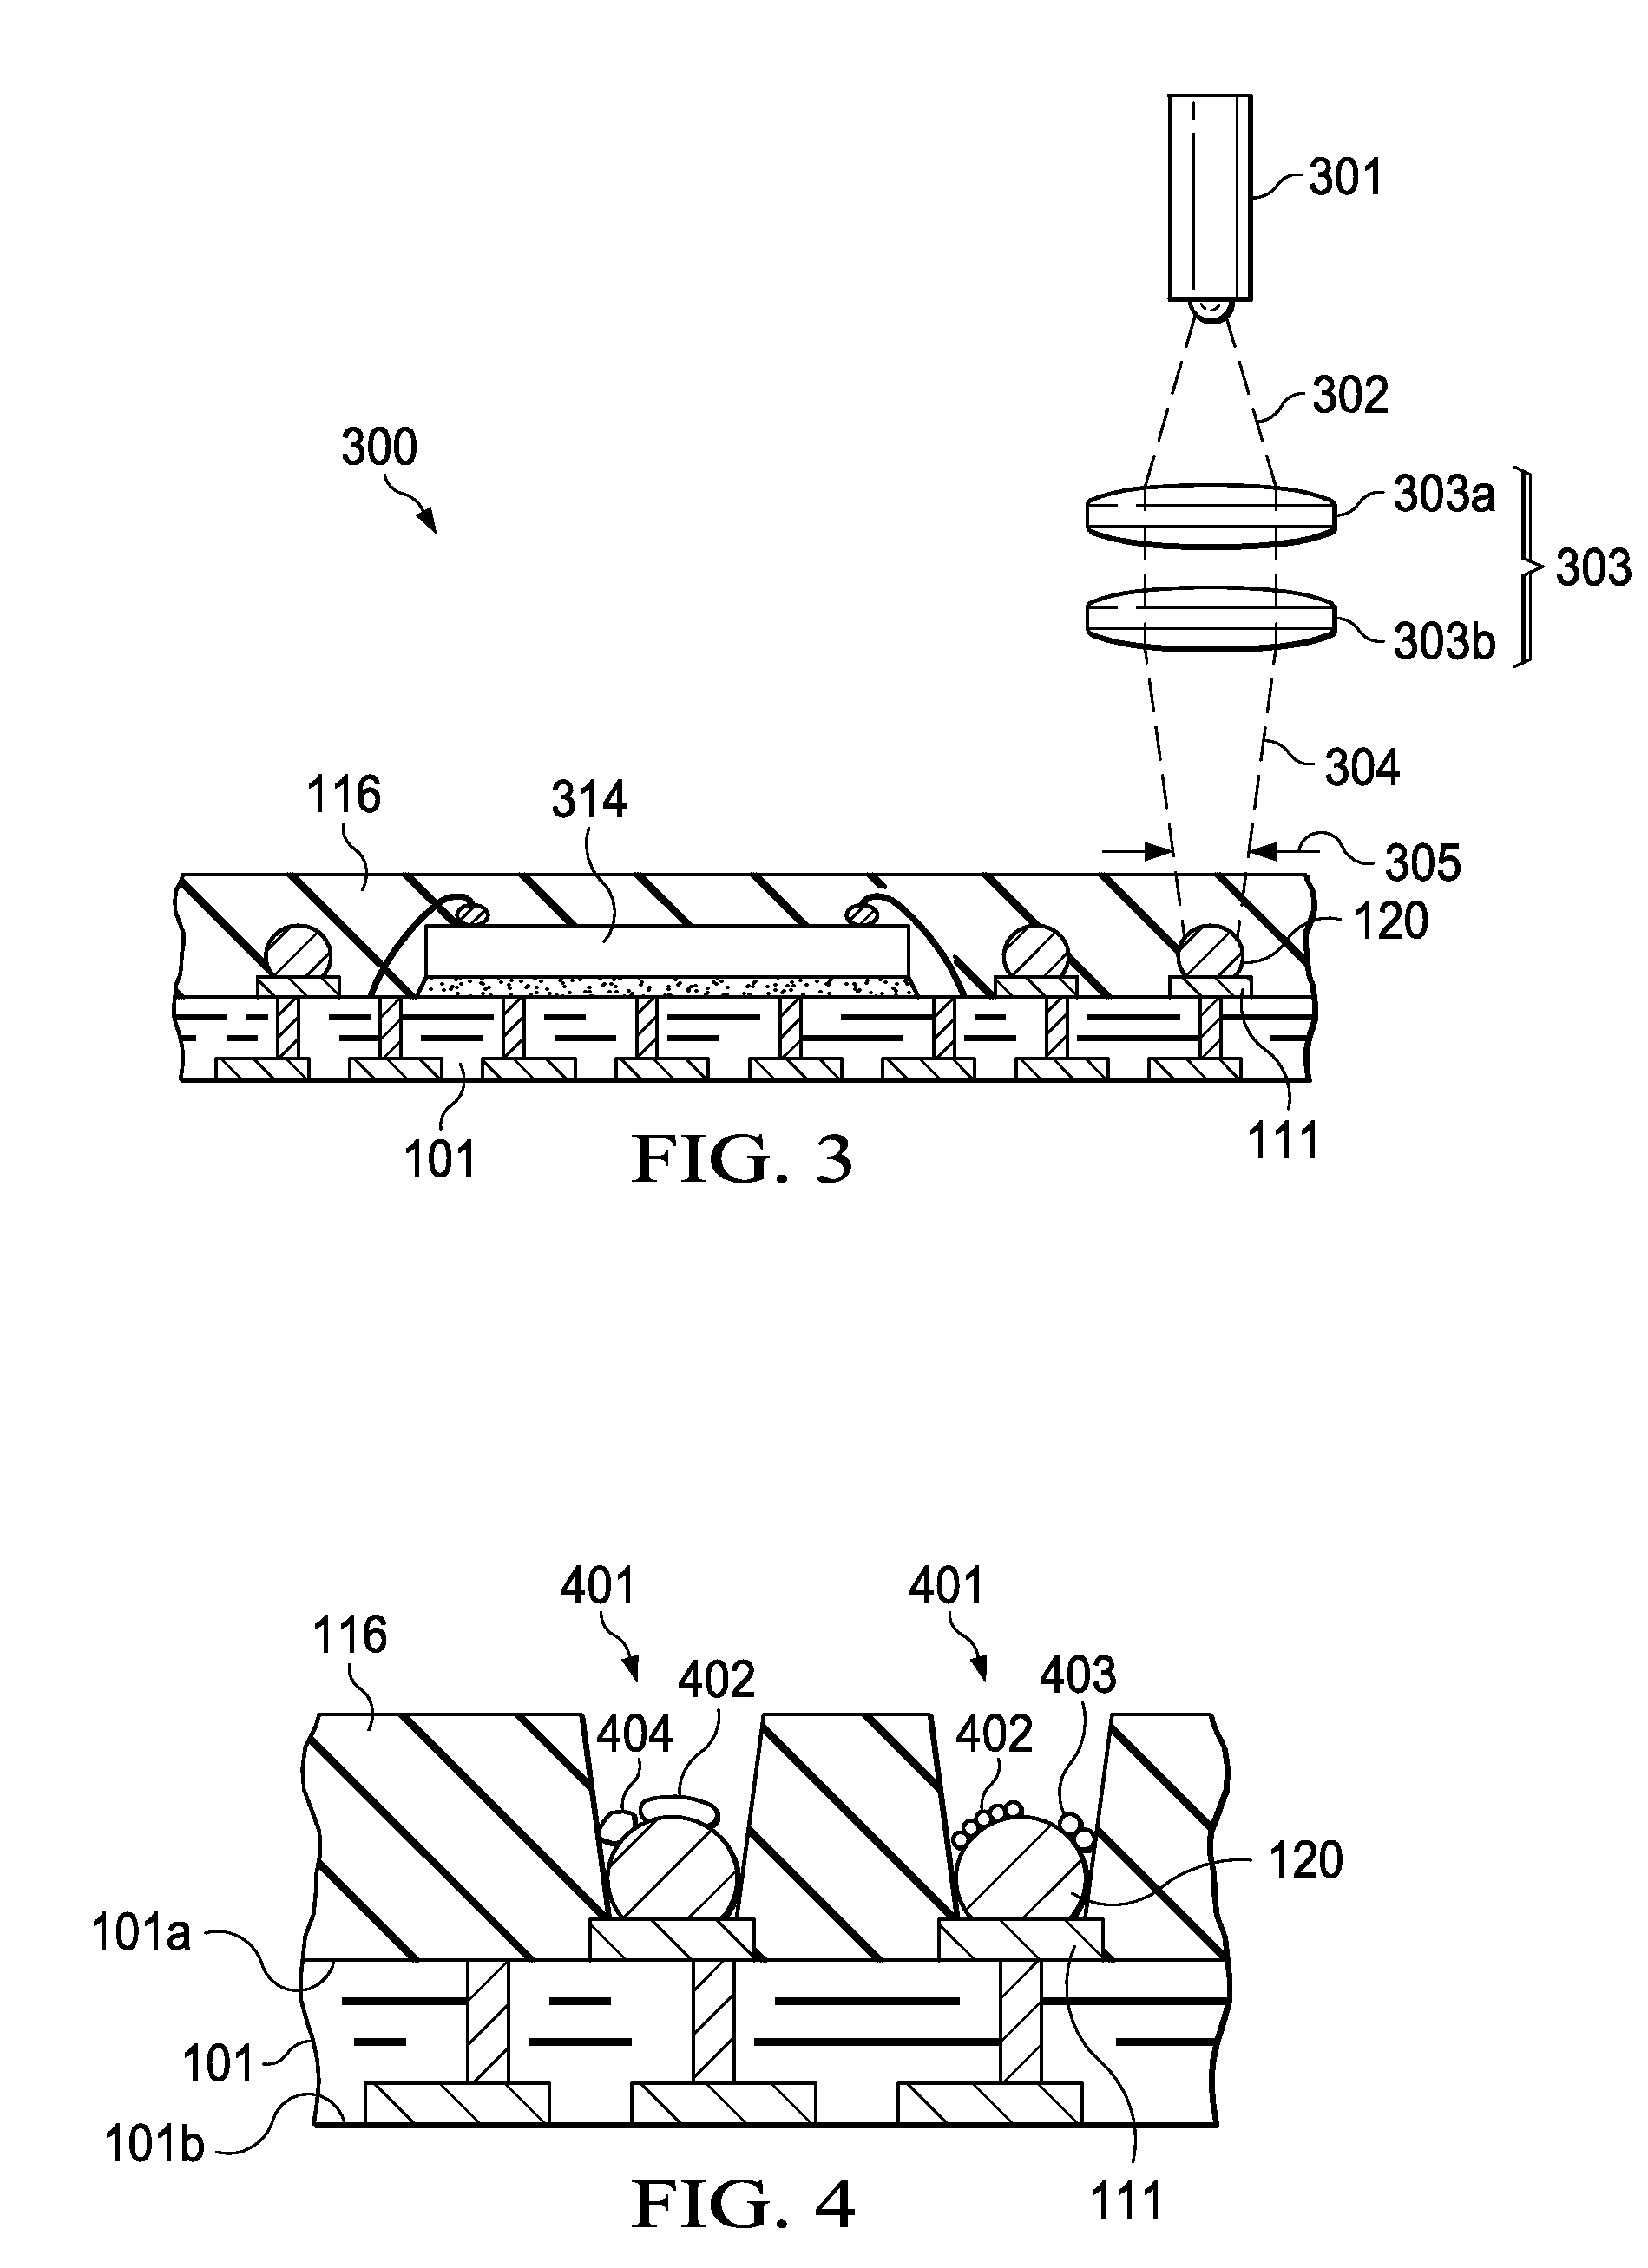 Method for exposing and cleaning insulating coats from metal contact surfaces